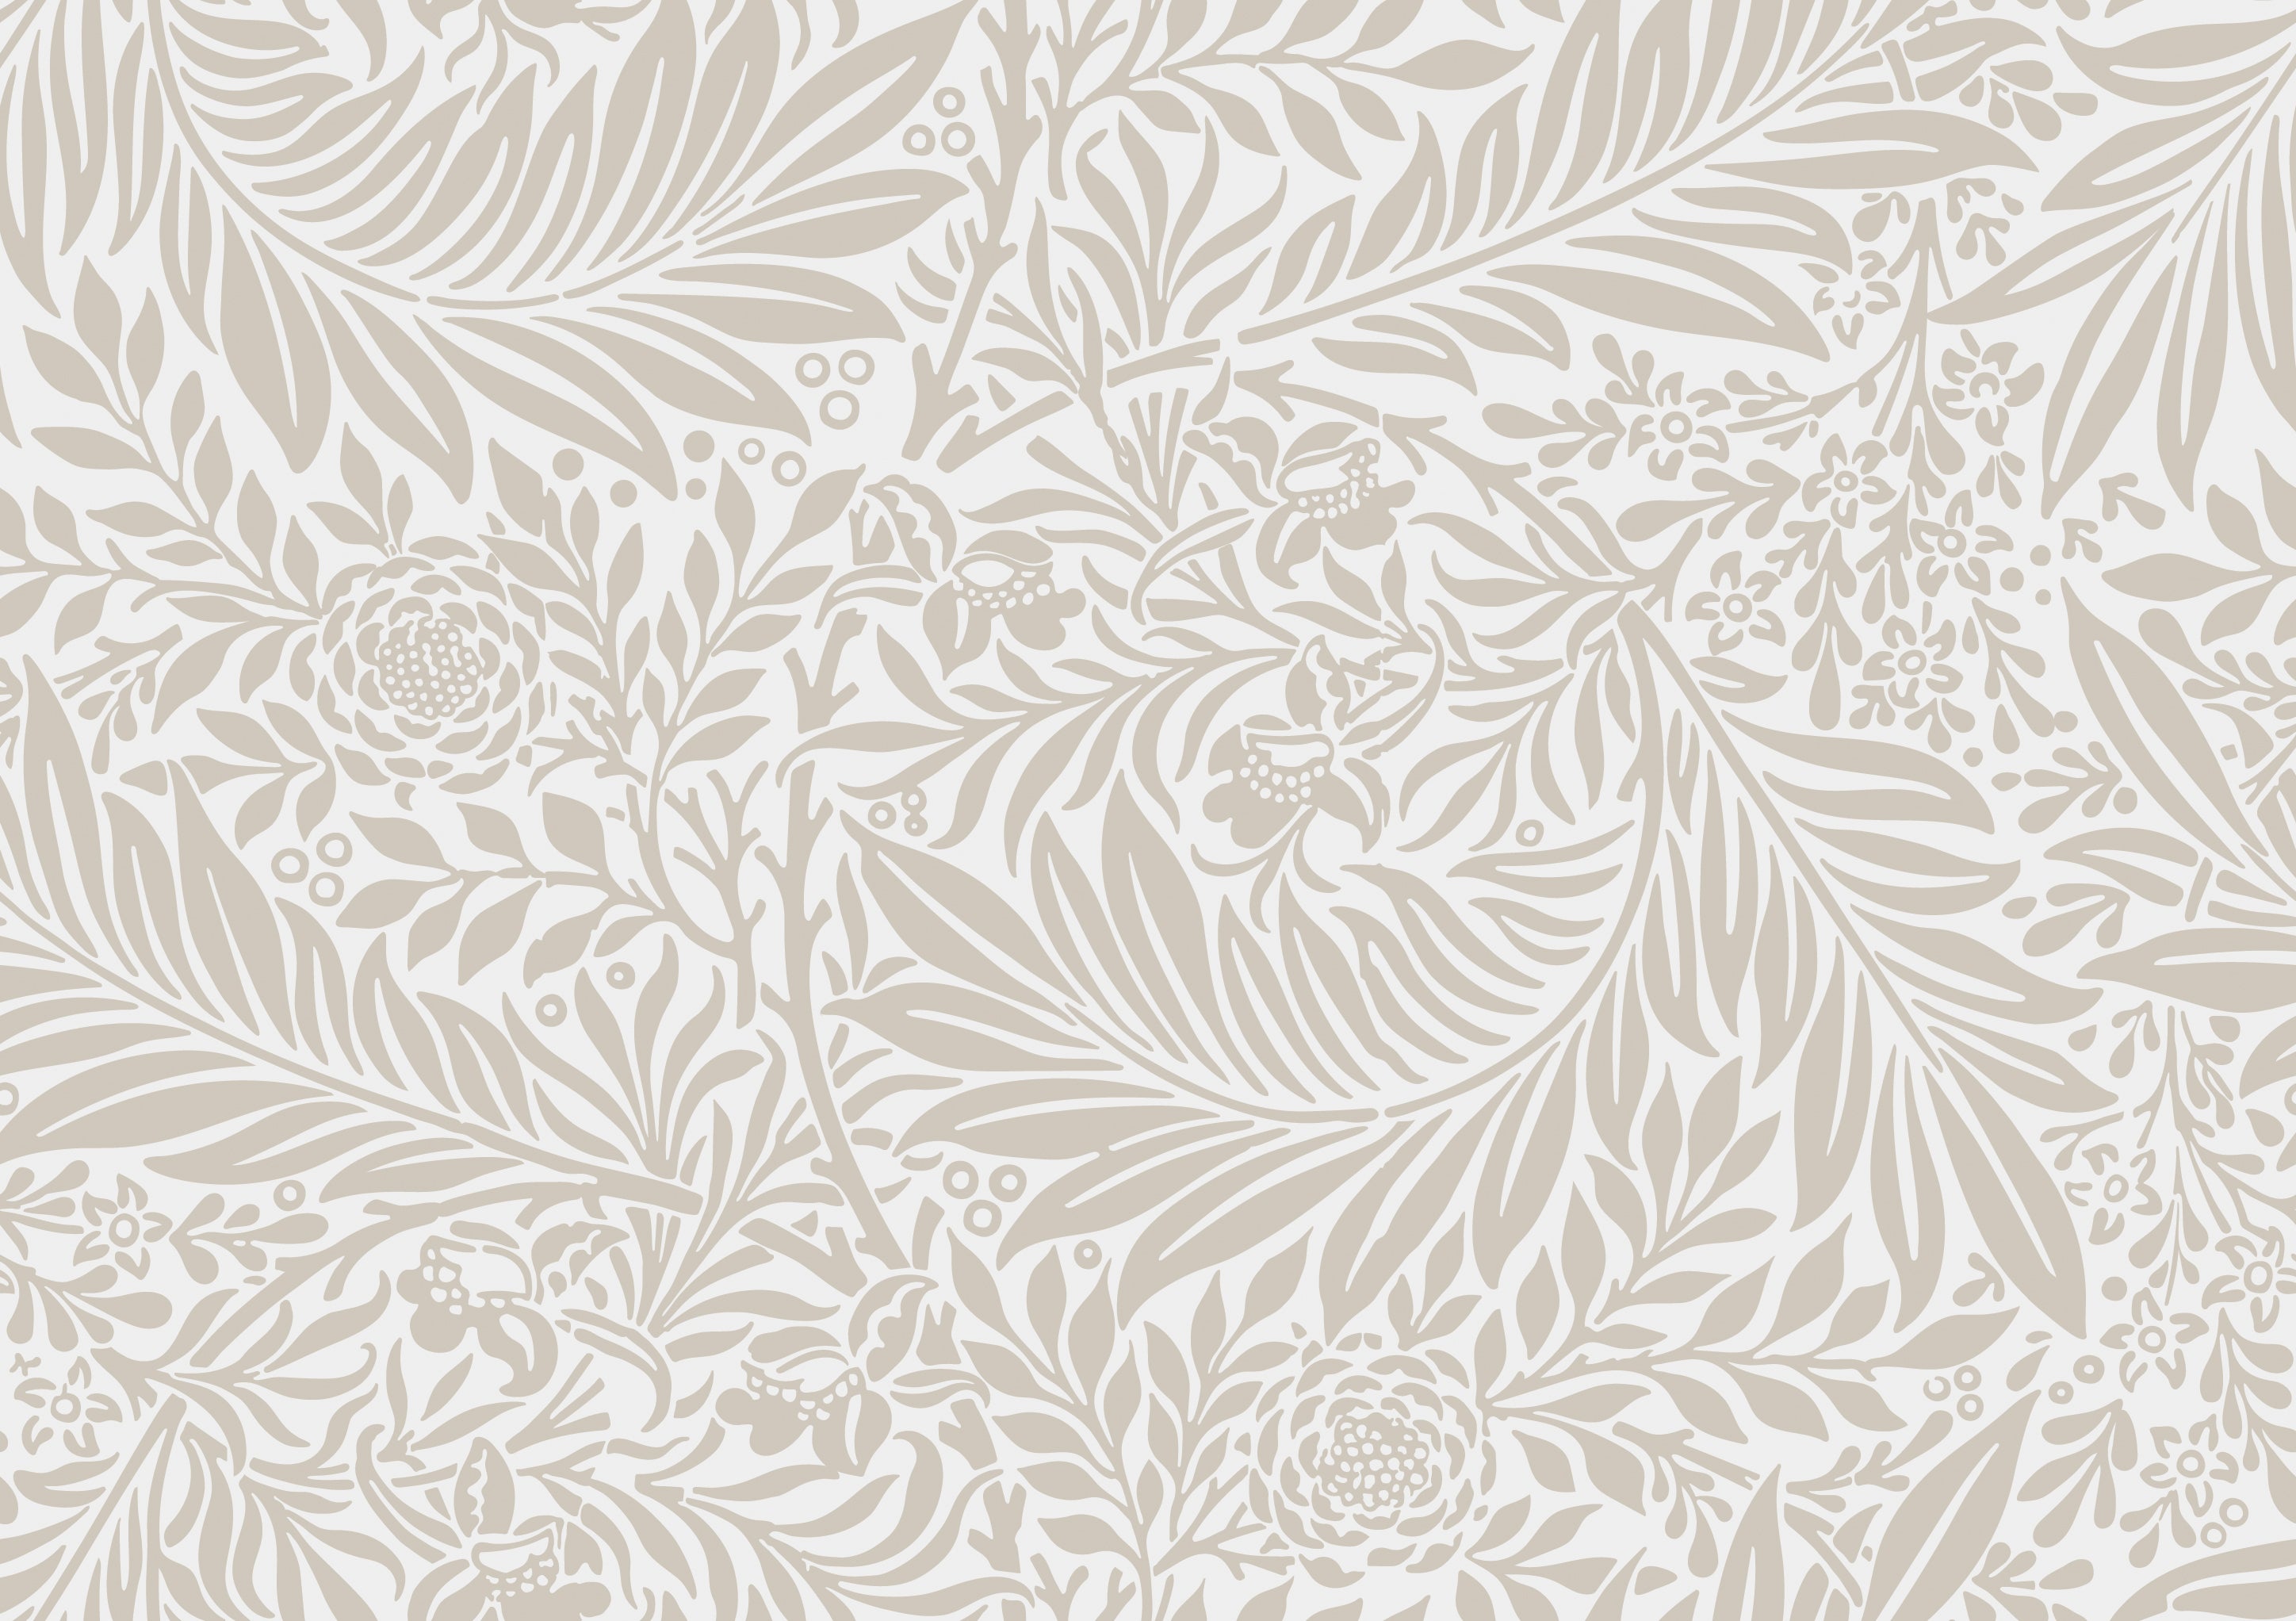 A close-up of the 'William Bough Wallpaper' detailing the intricate floral and foliage pattern in a soft taupe that evokes a vintage aesthetic.